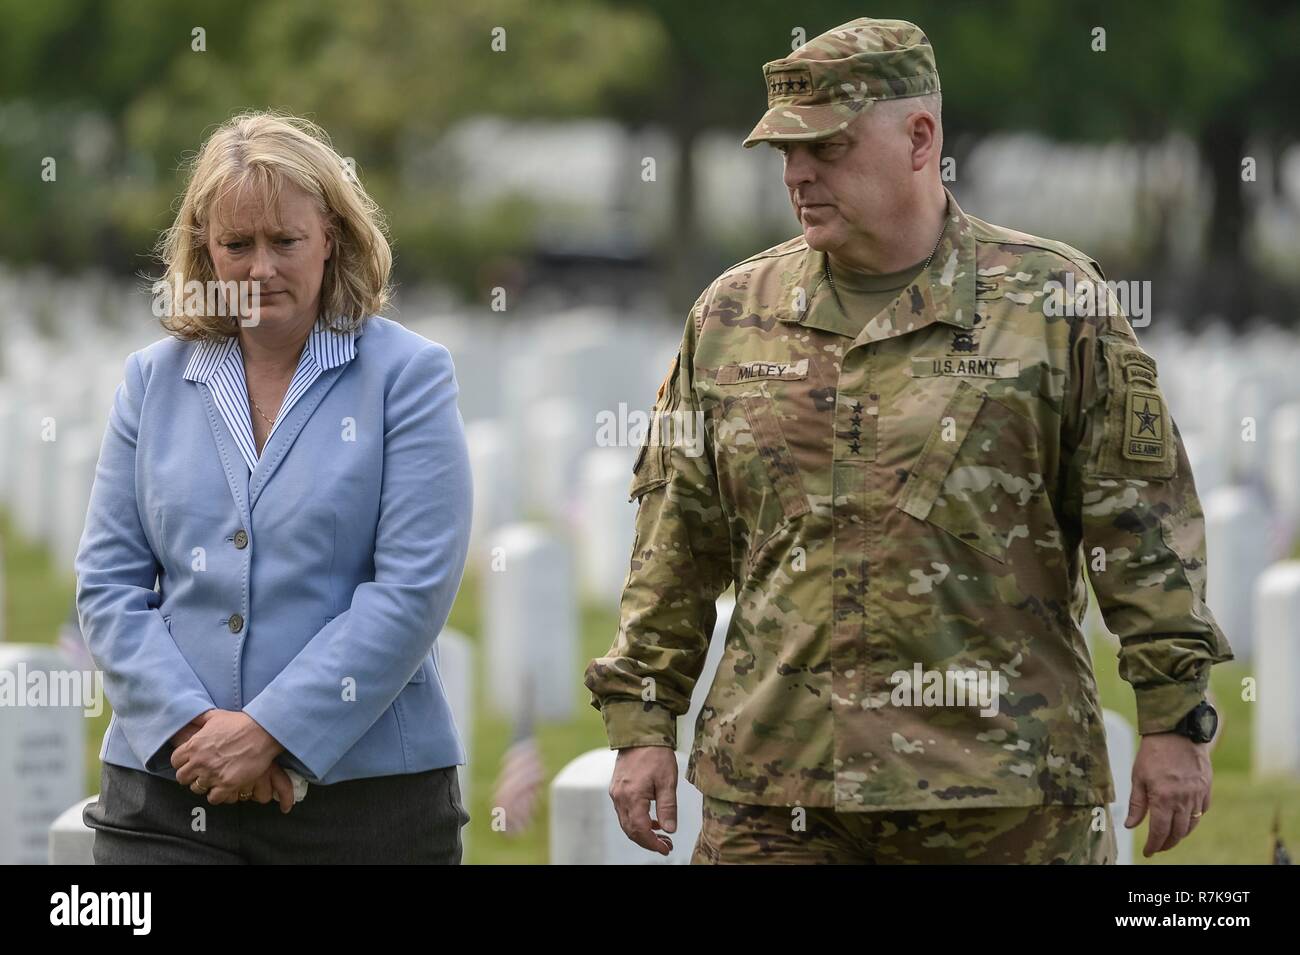 U.S. Army Chief of Staff Gen. Mark Milley and his wife Hollyanne places flags at the graves of fallen soldiers during Memorial Day at Arlington National Cemetery May 26, 2016 in Arlington, Virginia. Milley was chosen by President Donald Trump on December 8, 2018 to be the next Chairman of the Joint Chiefs. Stock Photo